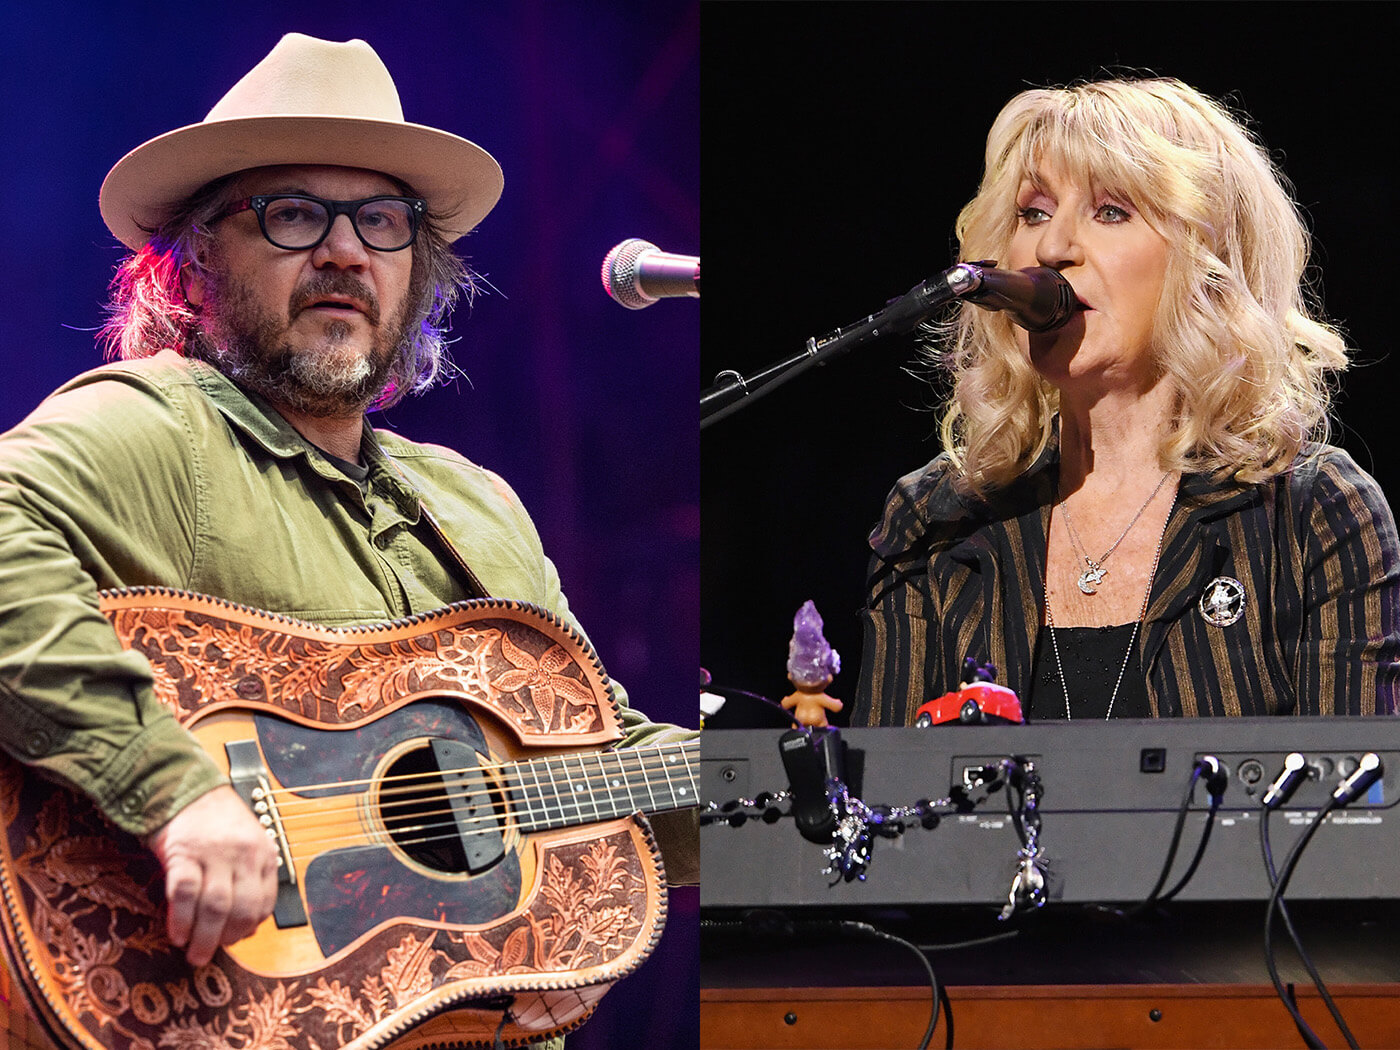 Jeff Tweedy honours Christine McVie with acoustic cover of Fleetwood Mac’s “Little Lies”